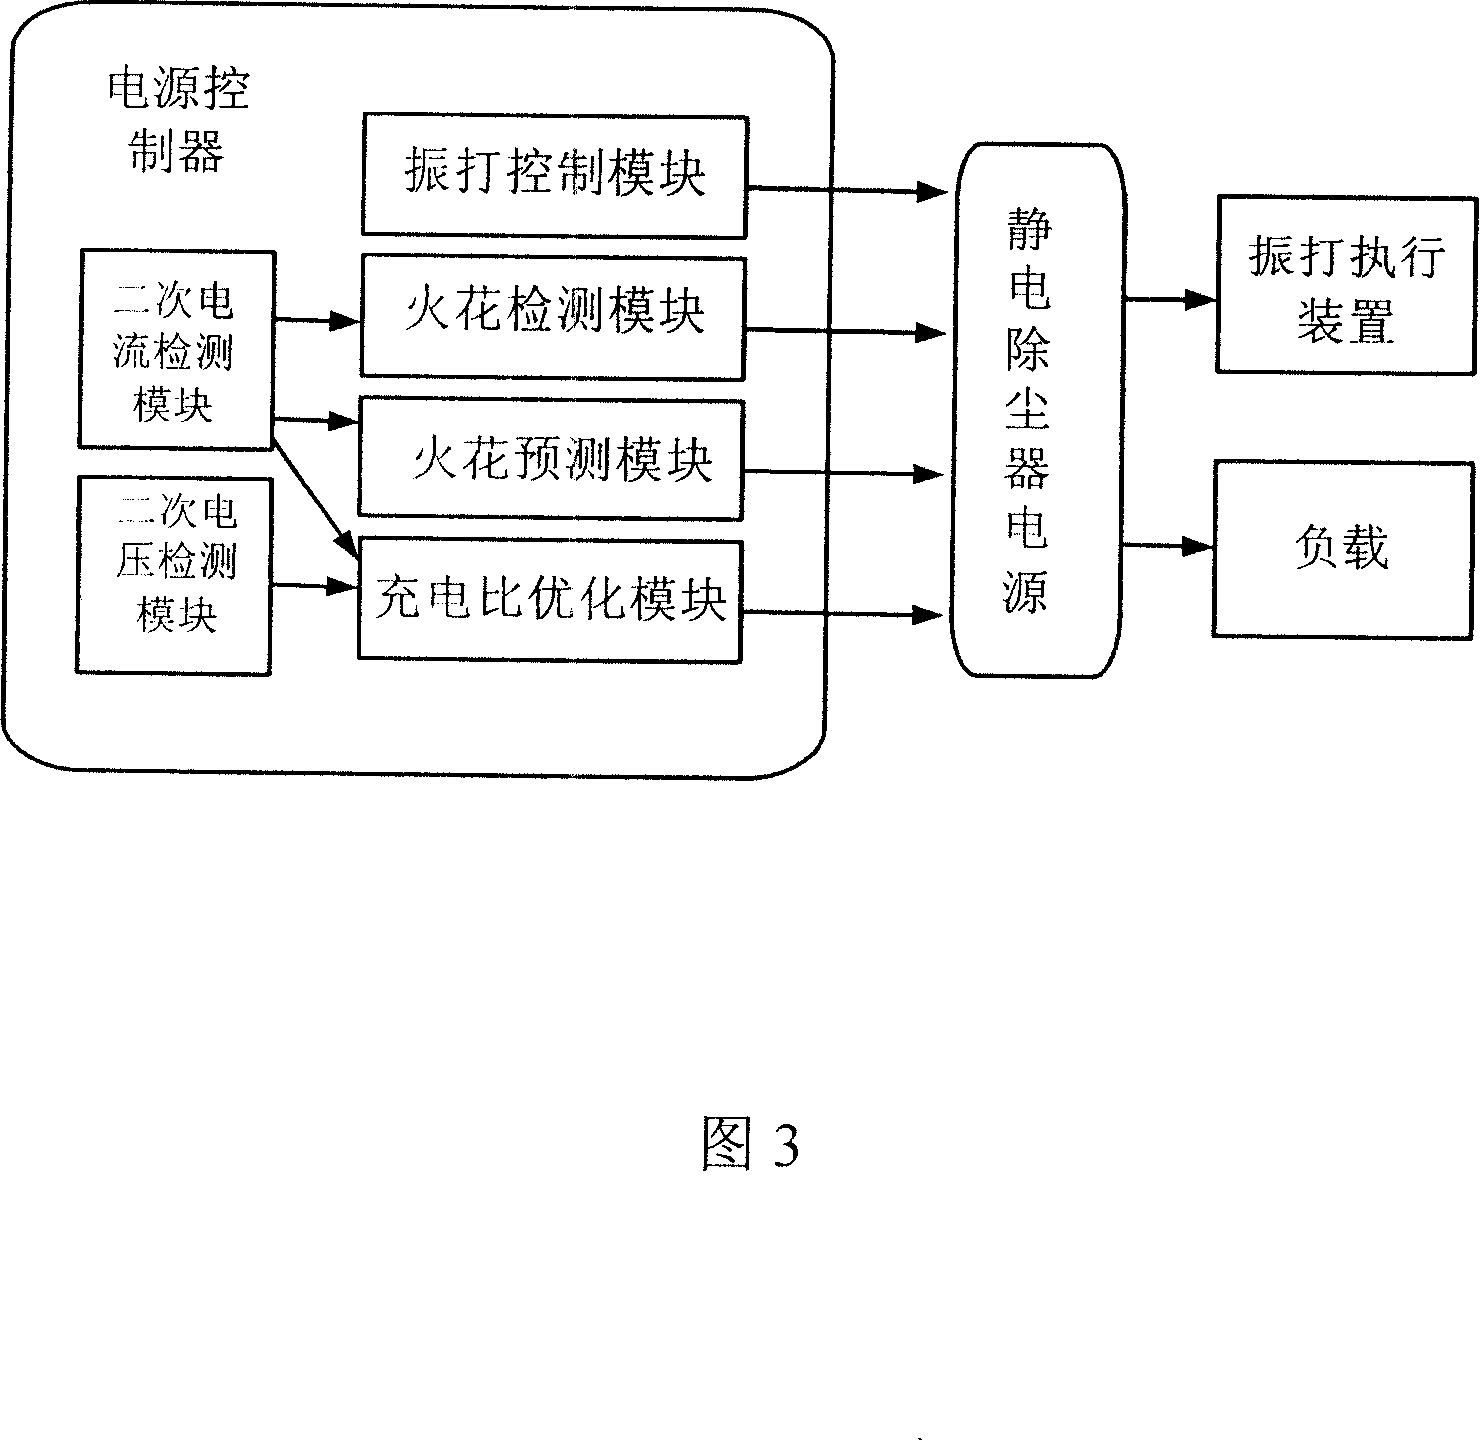 Power-supply controller of electric dust collector and long-range control system of the same